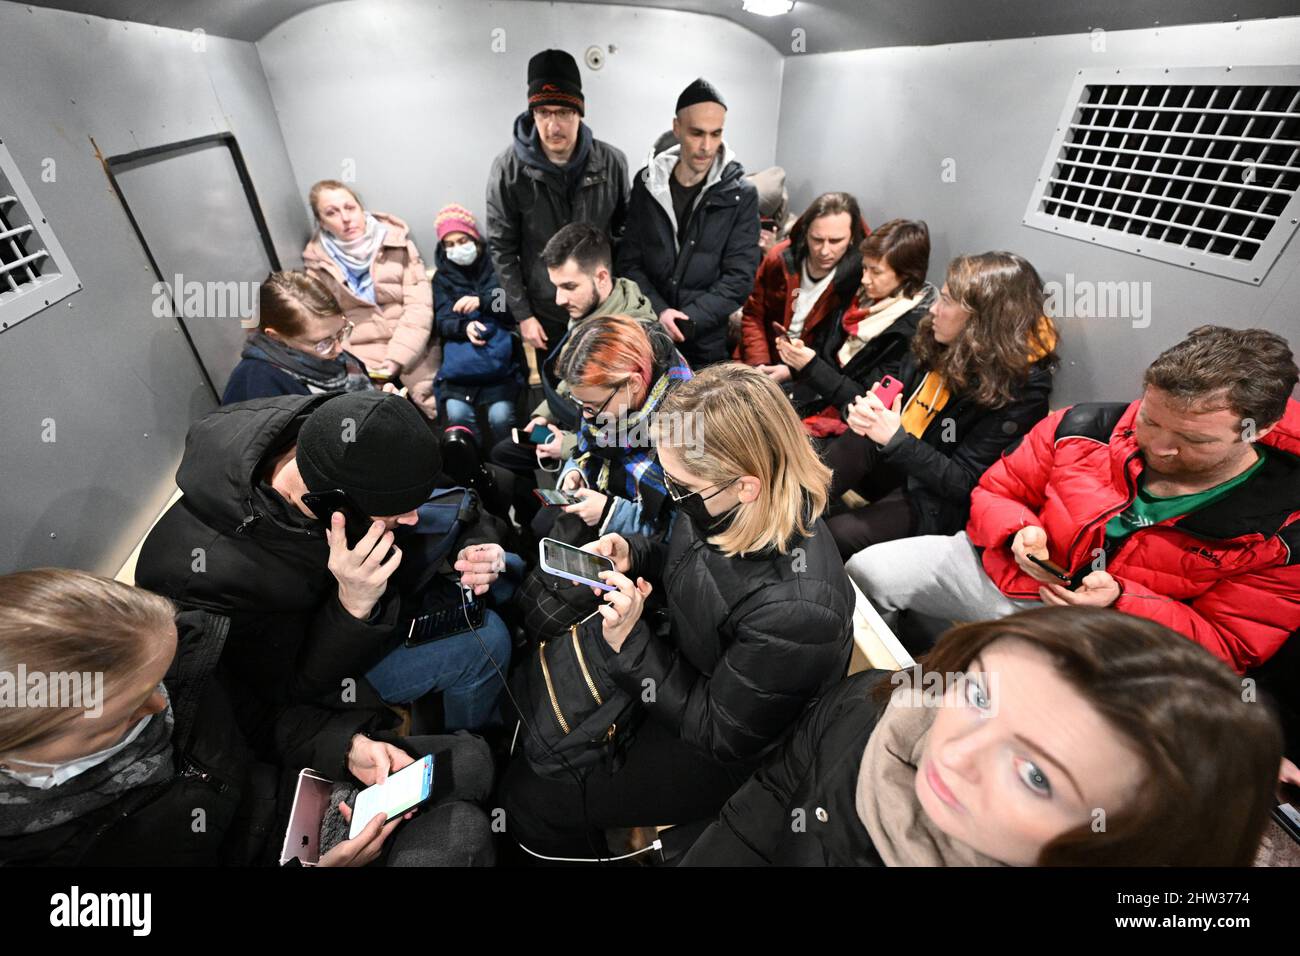 Unauthorized protest action against the special military operation of the Russian Armed Forces in Ukraine near Manezhnaya Square. Detained protesters in a paddy wagon. 02.03.2022 Russia, Moscow Photo credit: Alexander Miridonov/Kommersant/Sipa USA Stock Photo